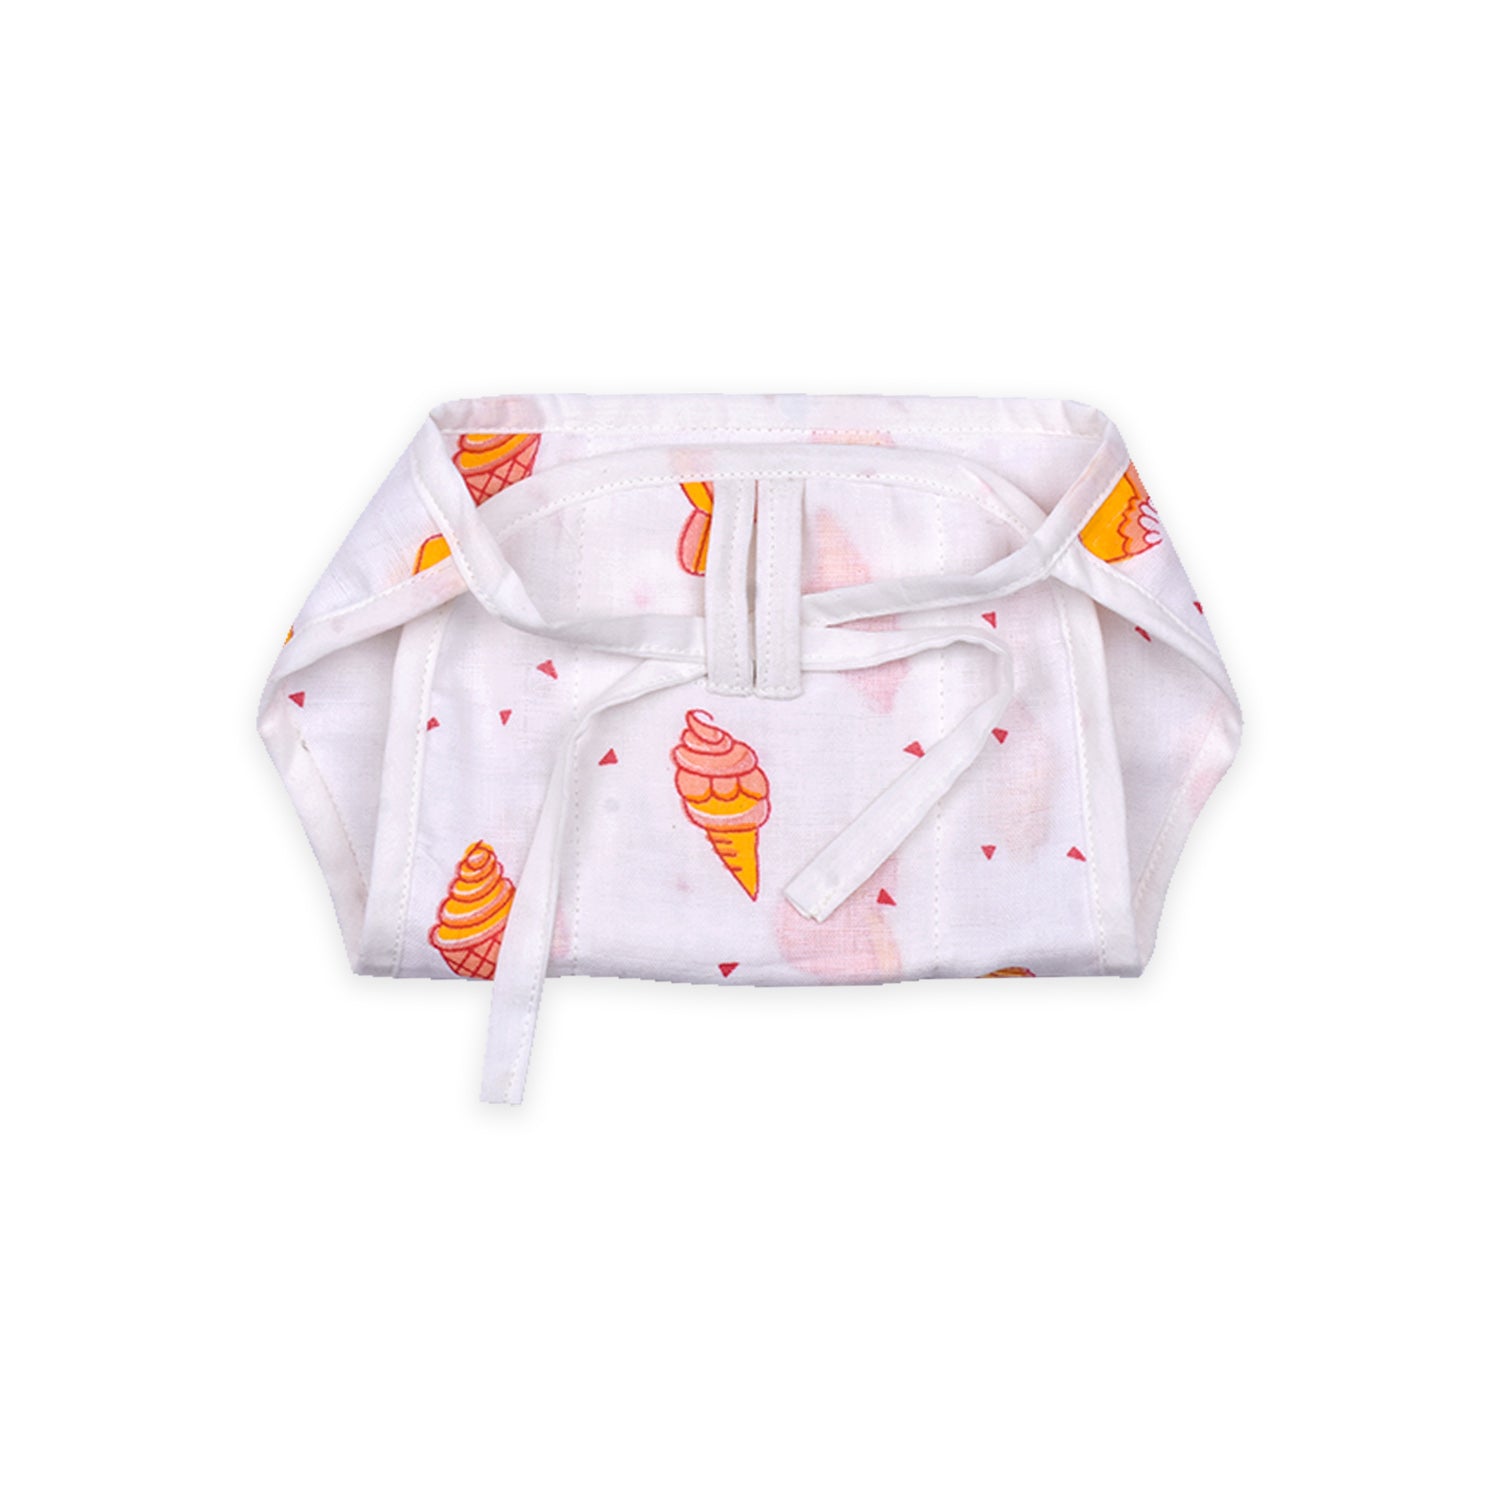 Baby Unisex Nappy Combo 1 Drysheet, 1 Printed Diaper, 1 Padded Underwear, 2 Muslin Nappy, - Multicolor- 0-12 Months